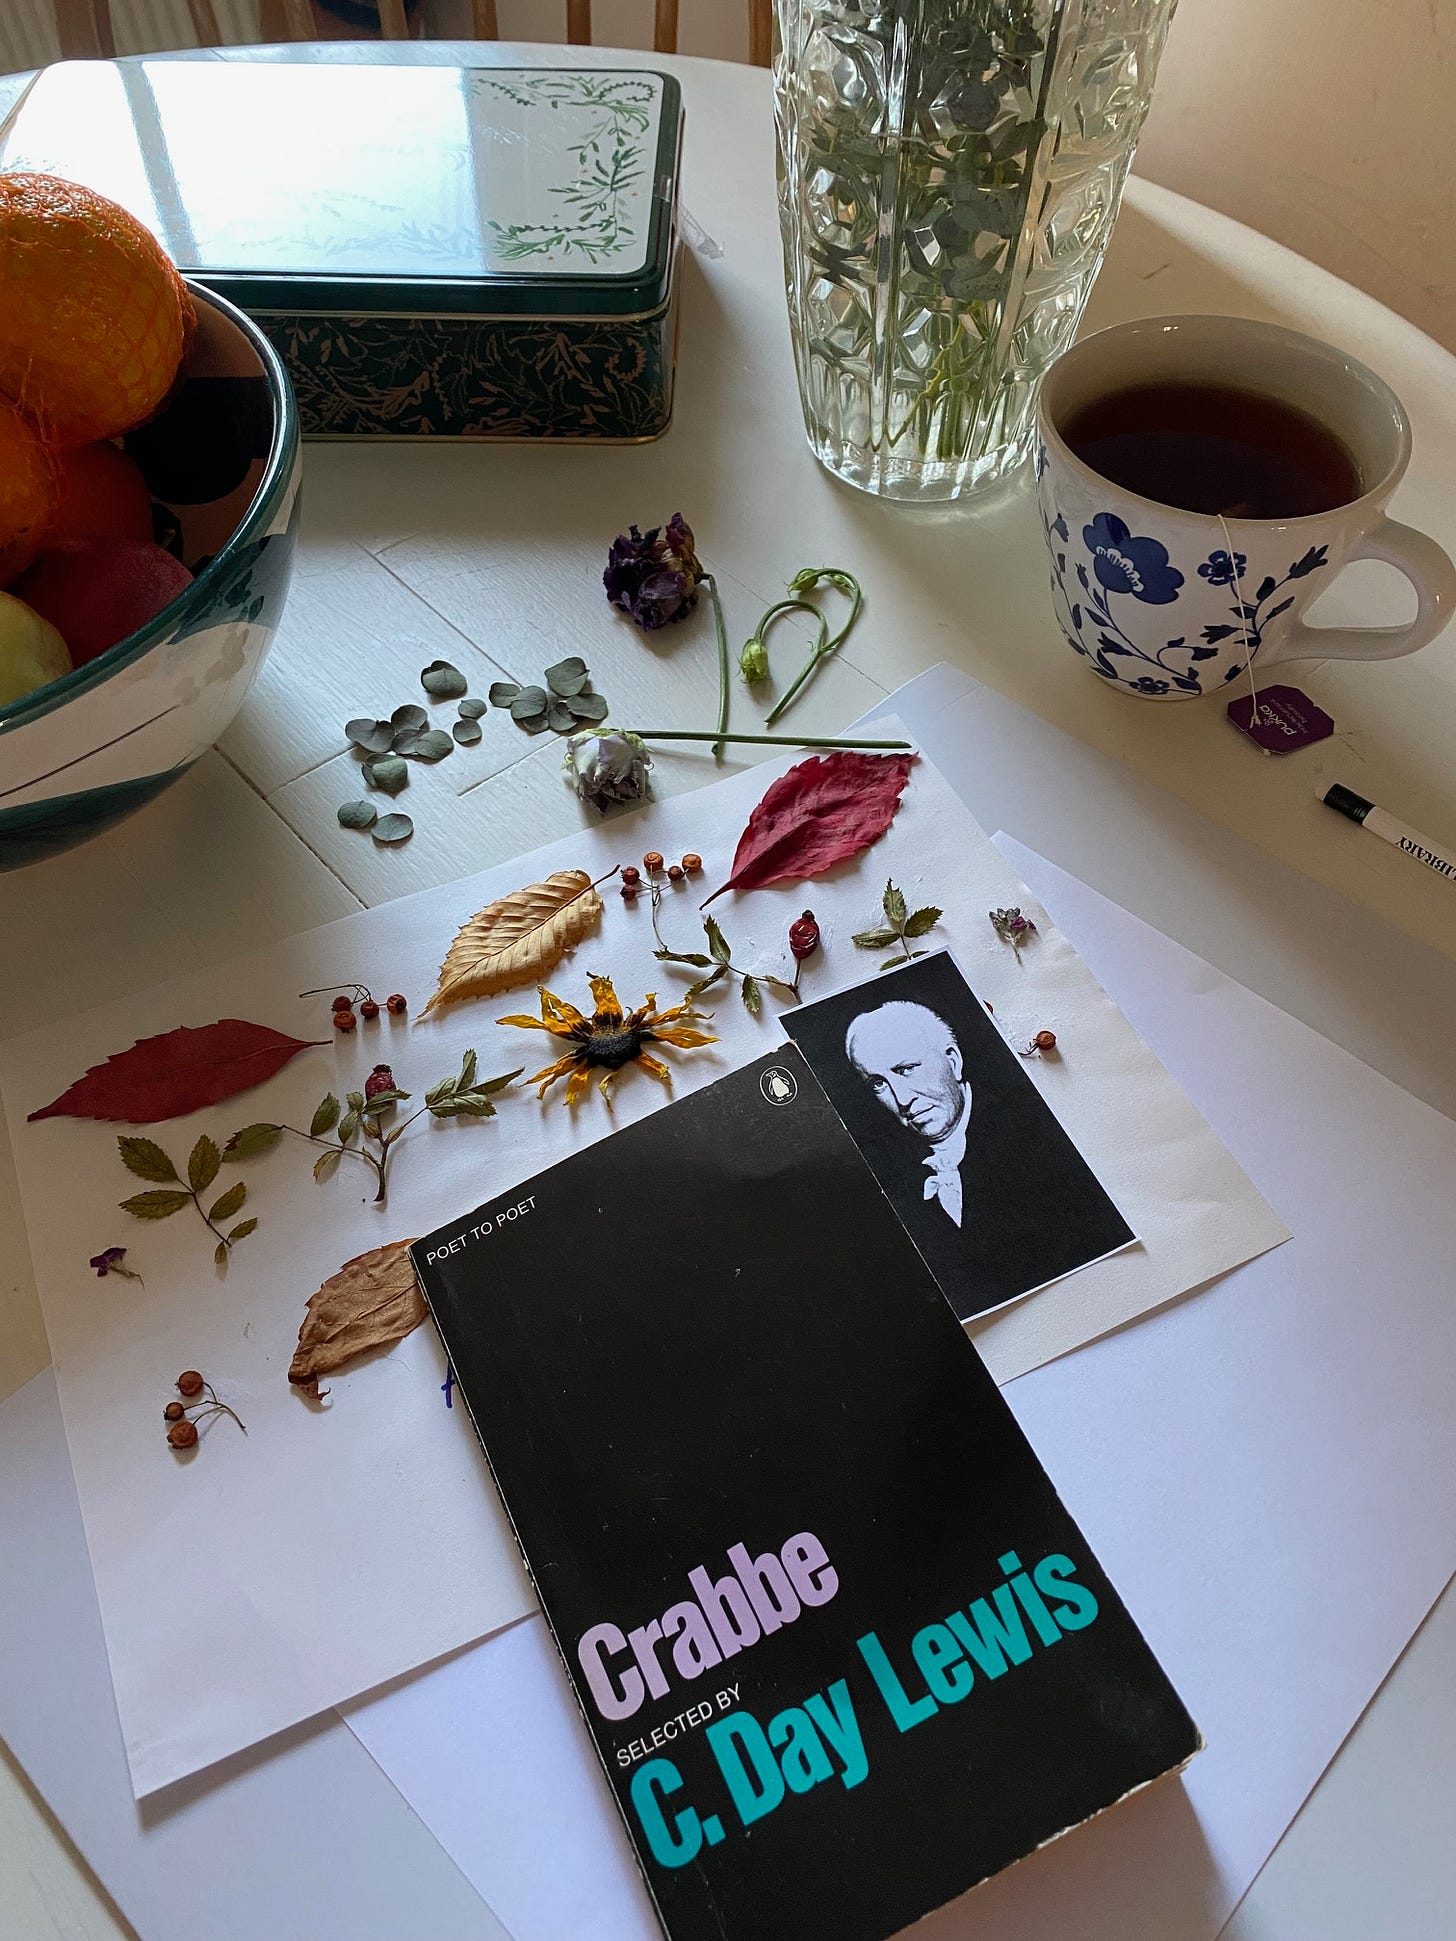 A cluttered table on which can be seen a book of poems by George Crabbe, dried flowers arranged on a page and a cup of tea.